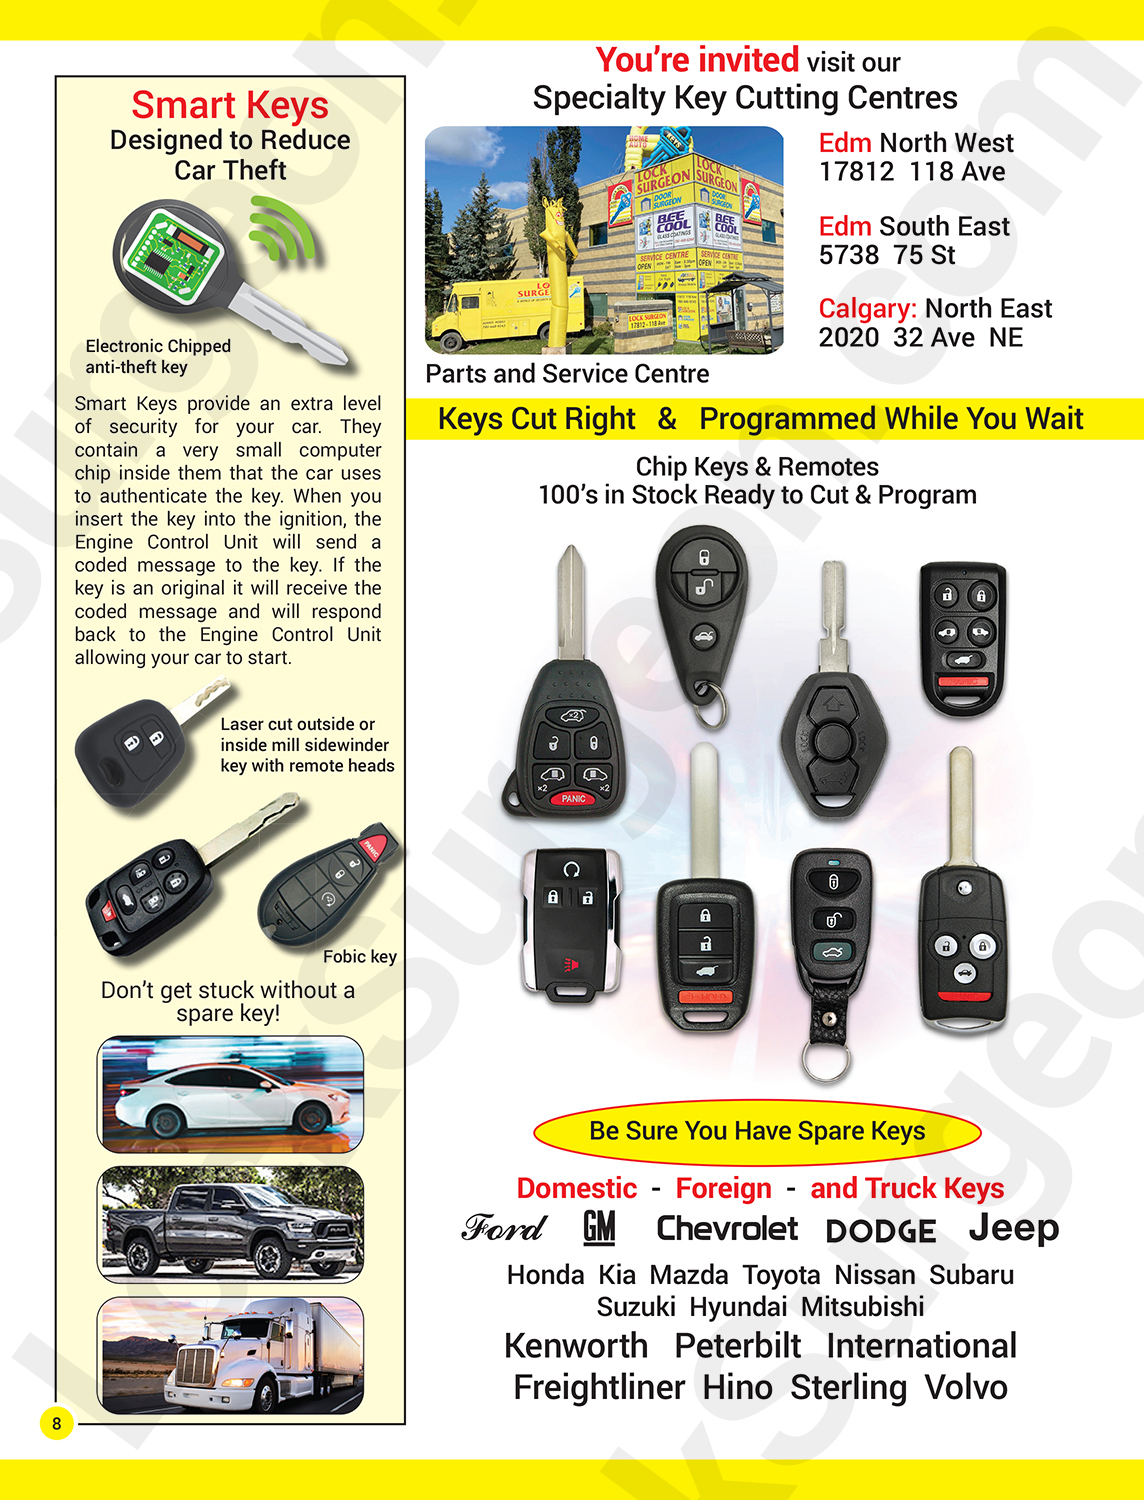 Automotive chip-key cutting programming sales and service centre.